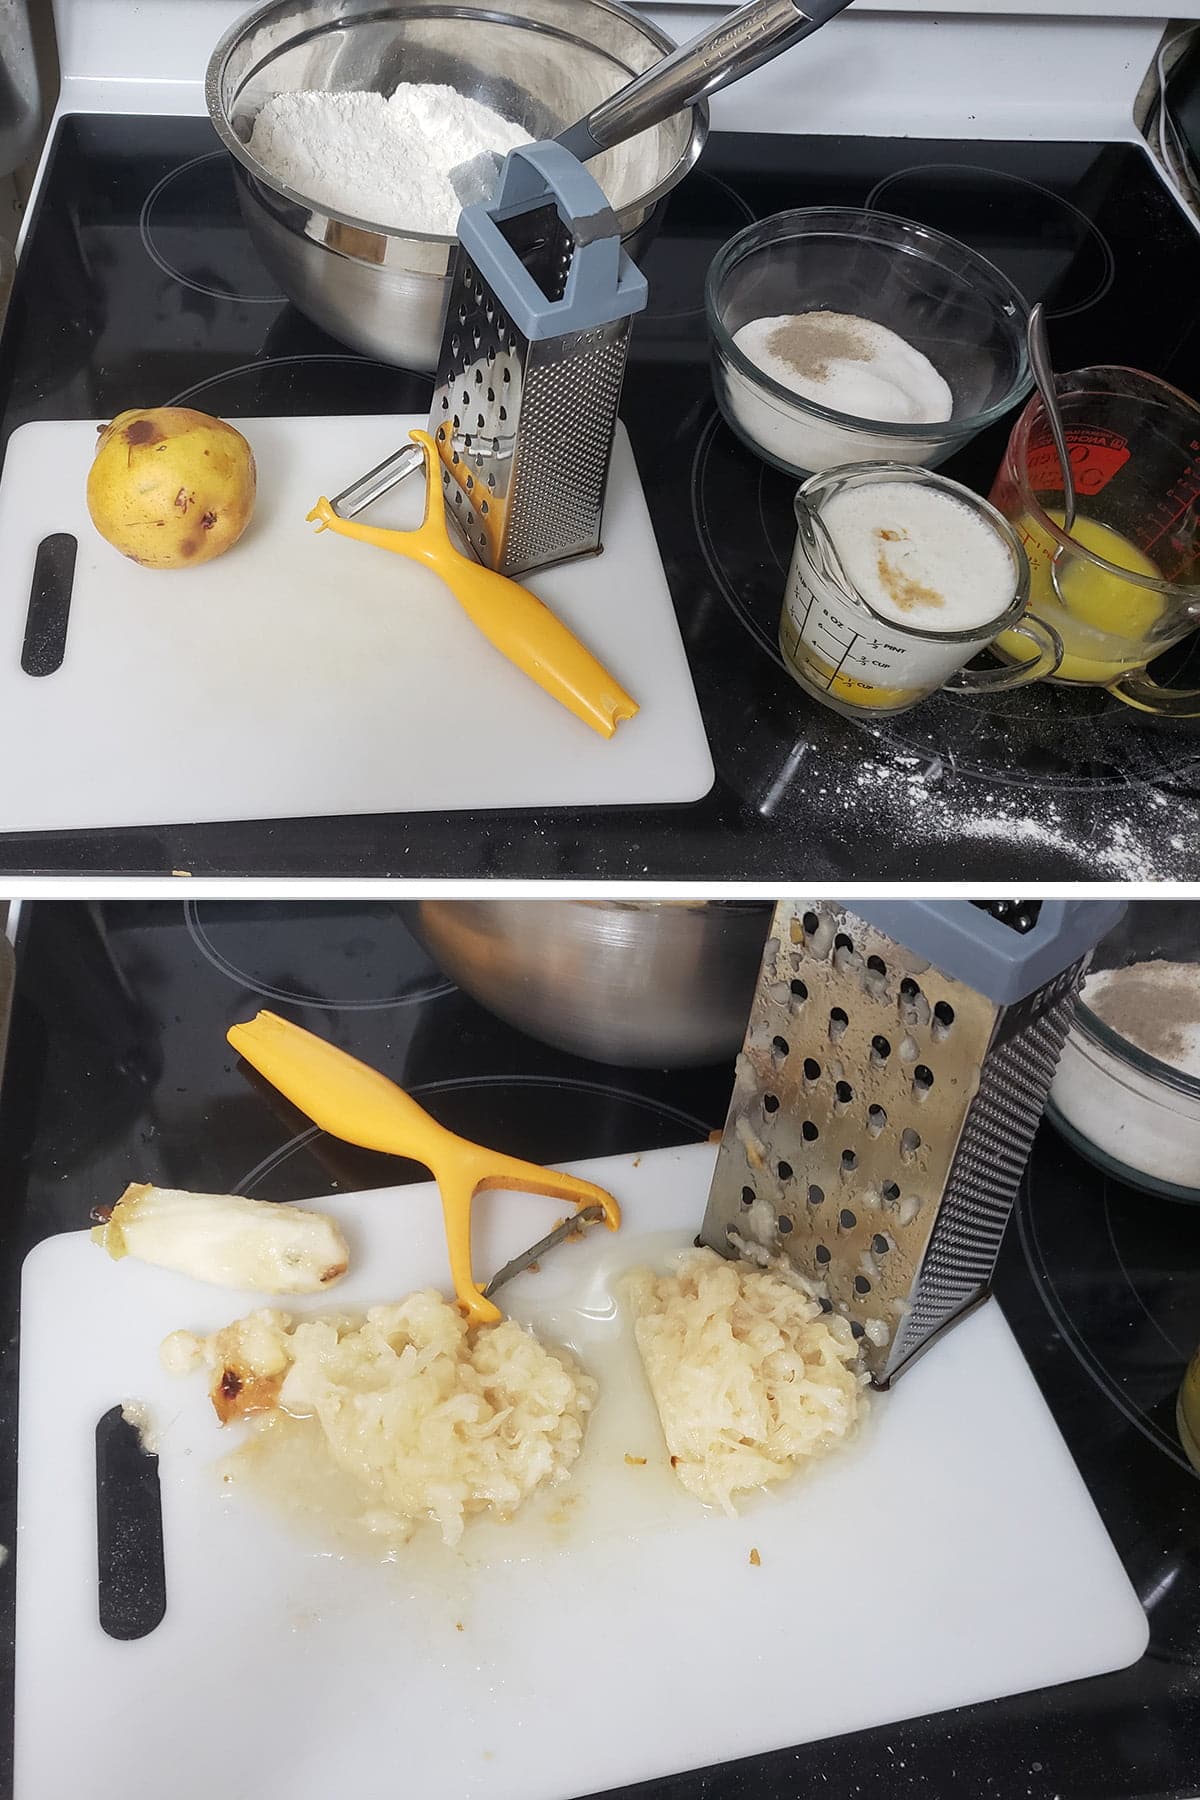 A two part compilation image showing the ingredients being prepared, and the pear being grated.